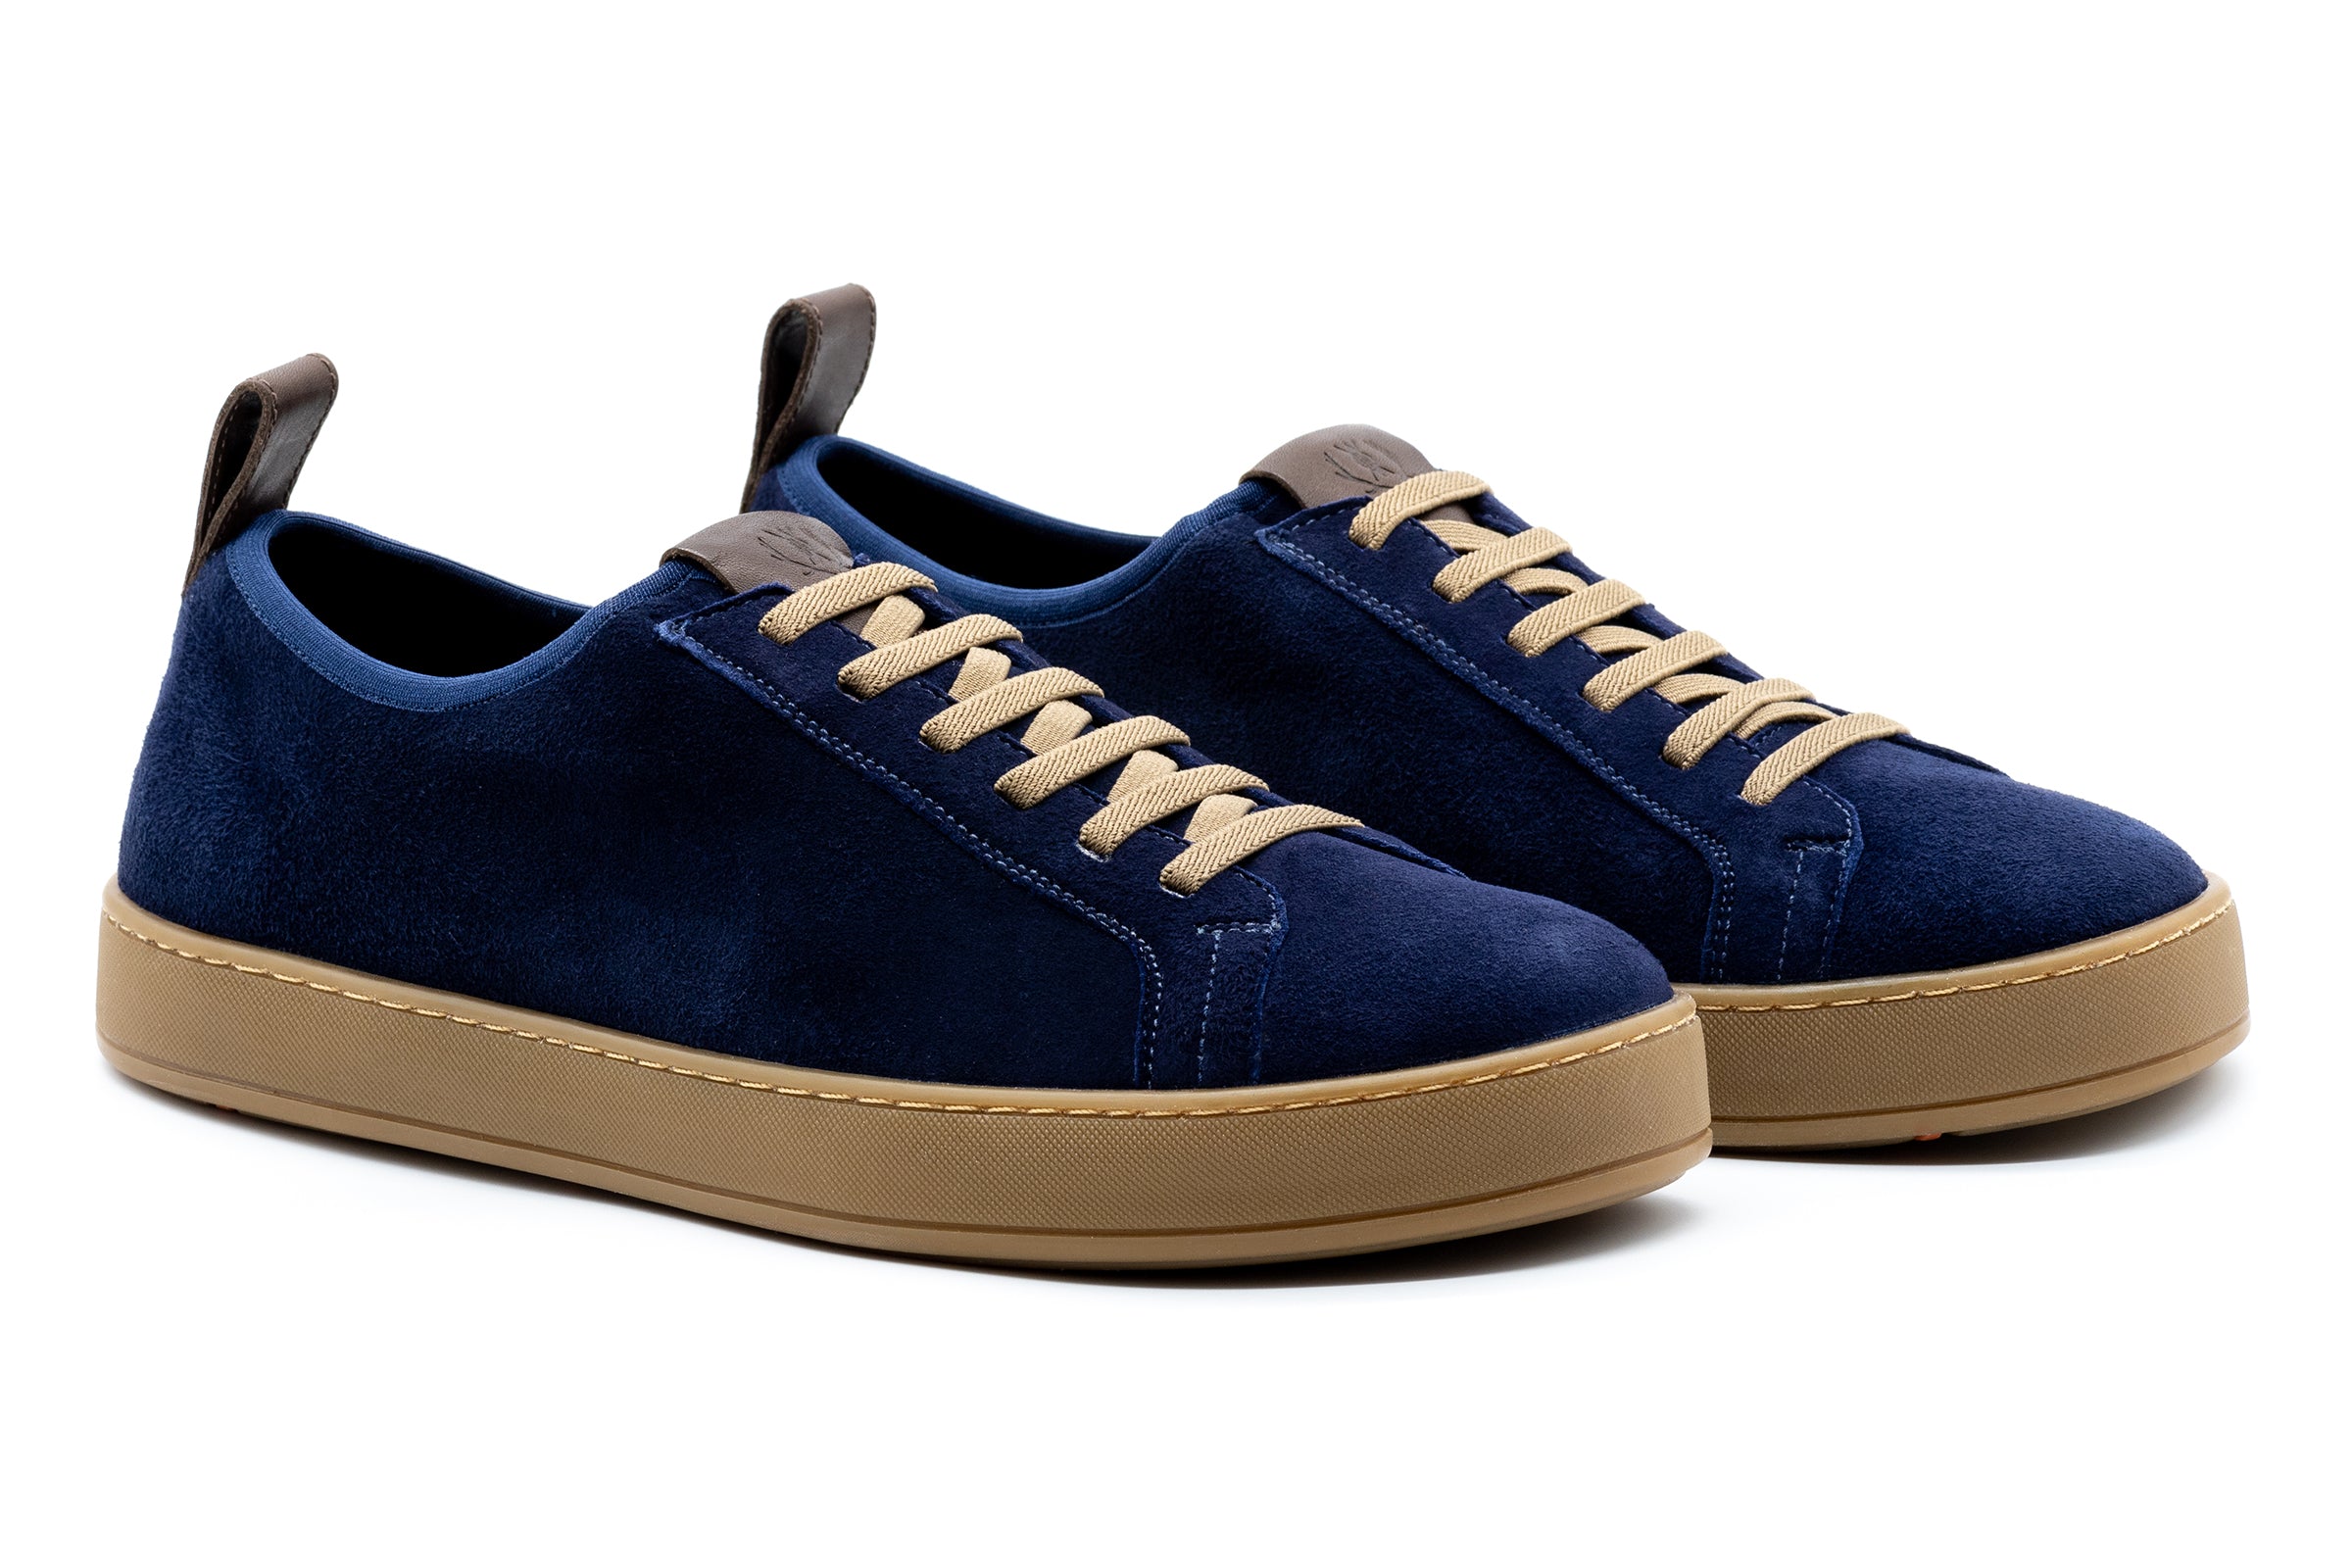 MD Signature Sheep Skin Suede Sneakers - Navy